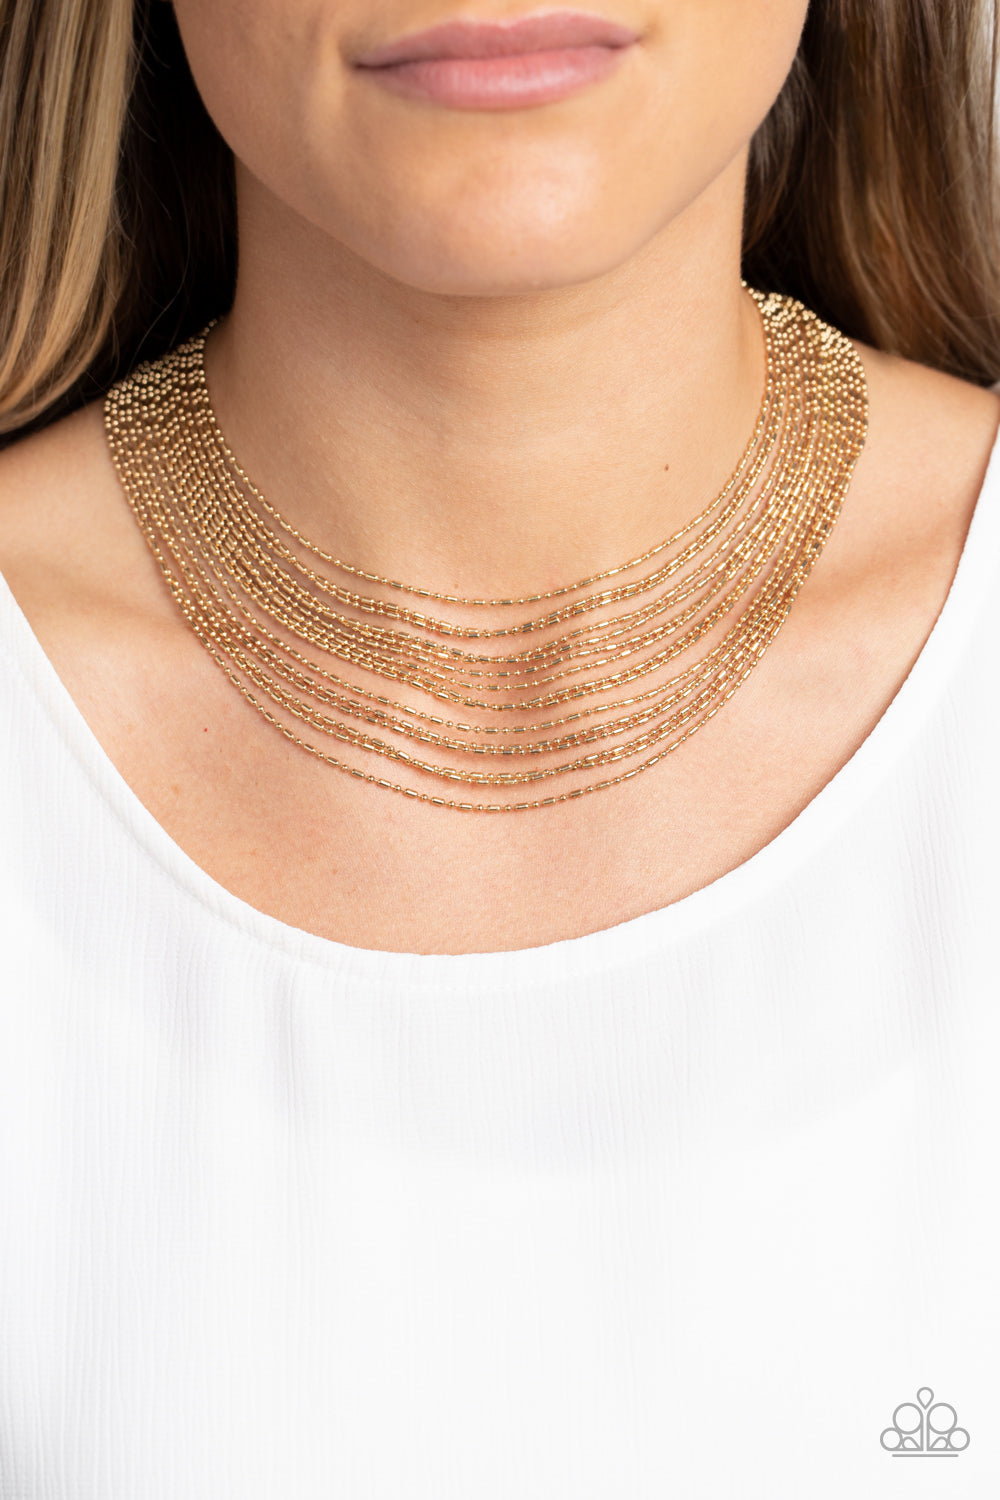 Cascading Chains - Gold - Bella Bling by Natalie